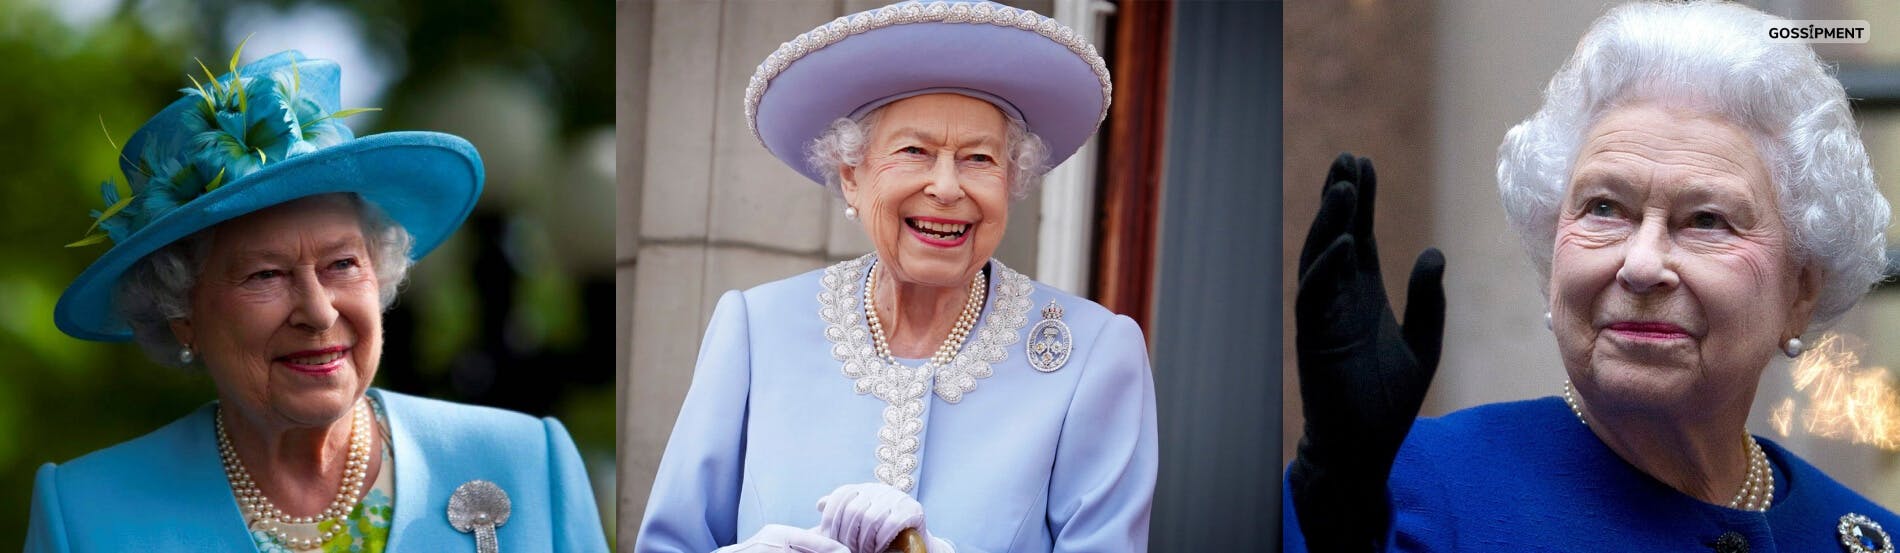 Cover Image for Queen Elizabeth II, The Longest Reigning Monarch Of Britain Passes Away At 96